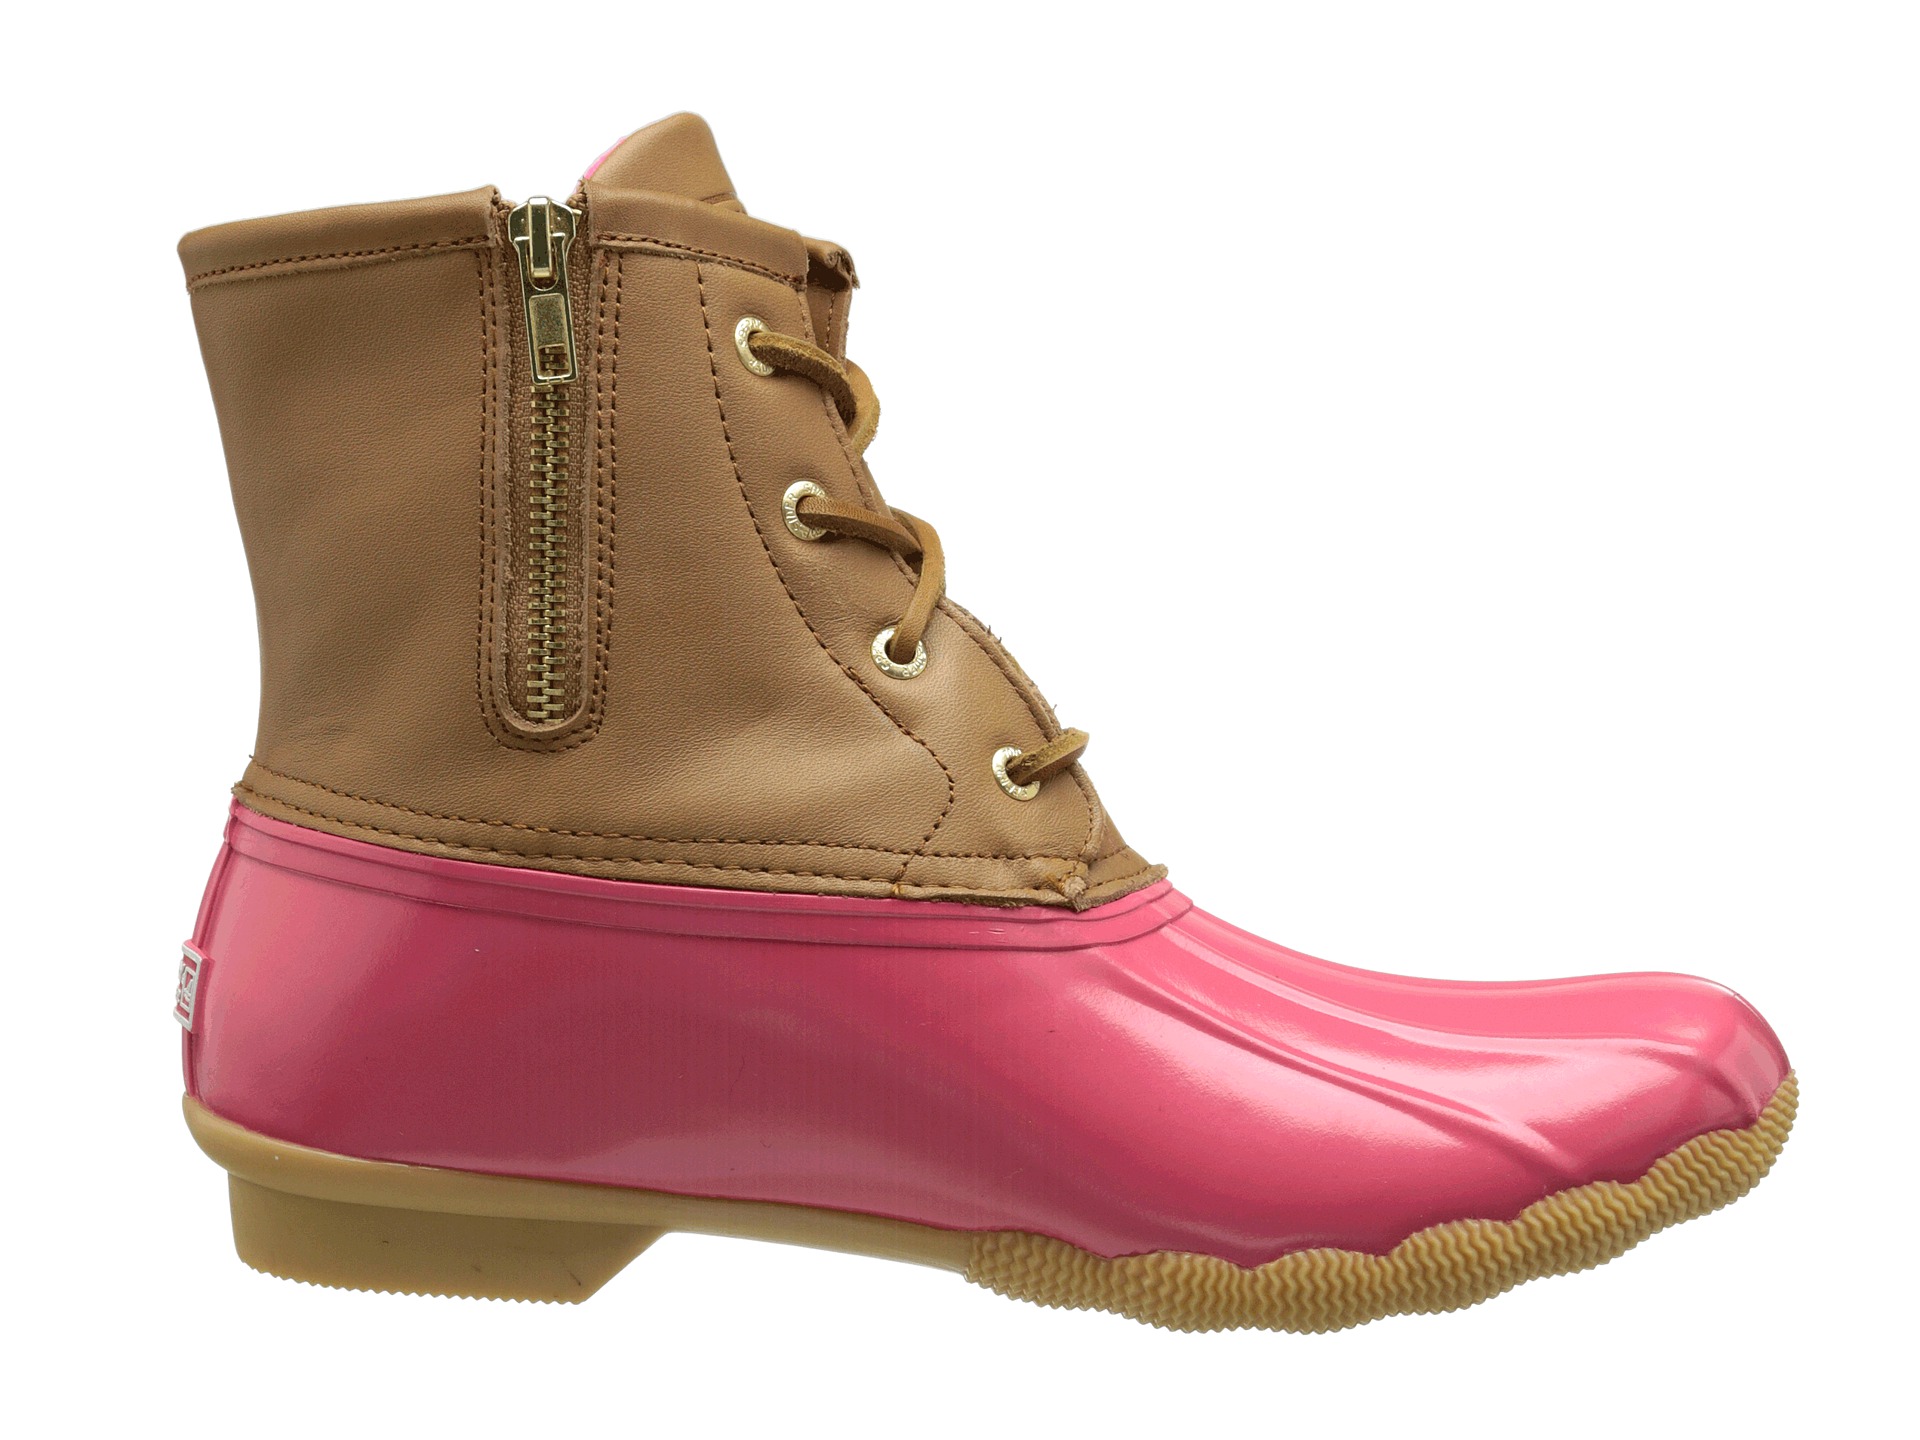 Sperry Top-Sider Saltwater Cognac/Pink - Zappos.com Free Shipping BOTH Ways